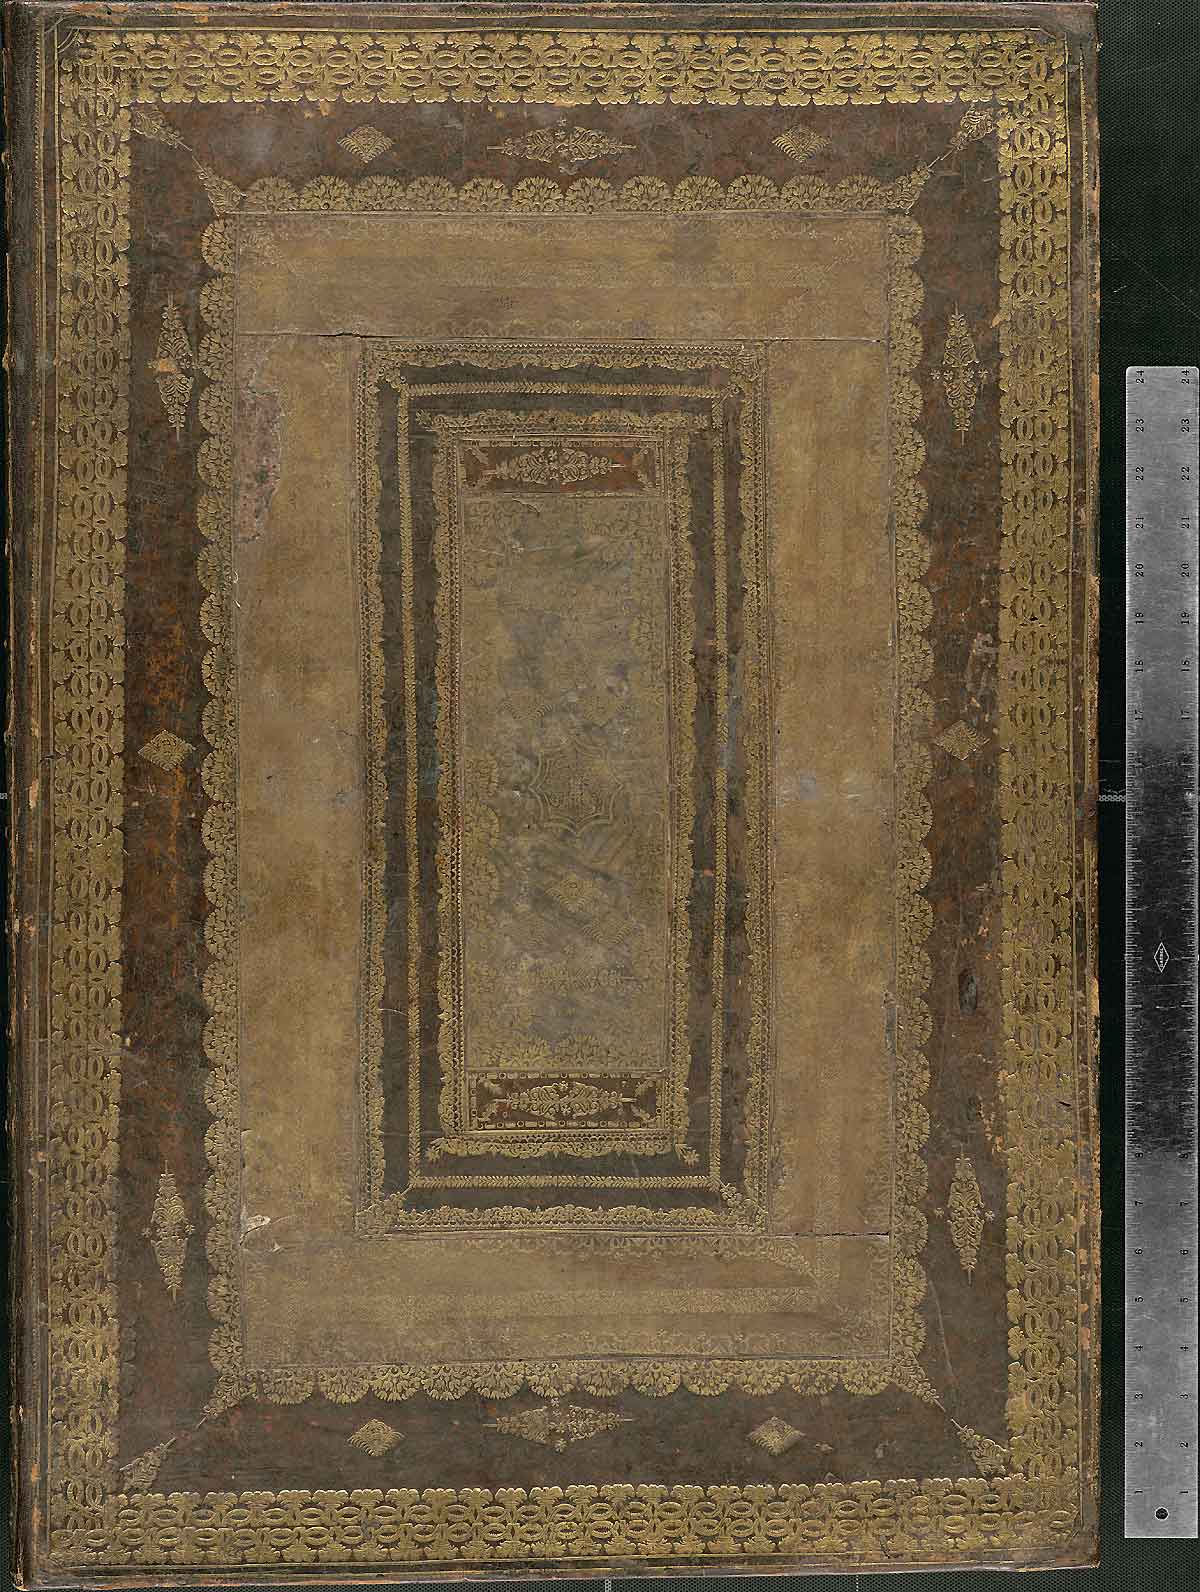 Panel binding of the front cover of NLM’s copy of Jacques Fabian Gautier d’Agoty’s Anatomie générale des viscères en situation, mainly featuring concentric rectangular panels with abundant gilding and use of goat skin; to the right is a yard stick, showing that the binding is about 1.5 meters in size, NLM Call no.: WZ 260 G283c 1745.